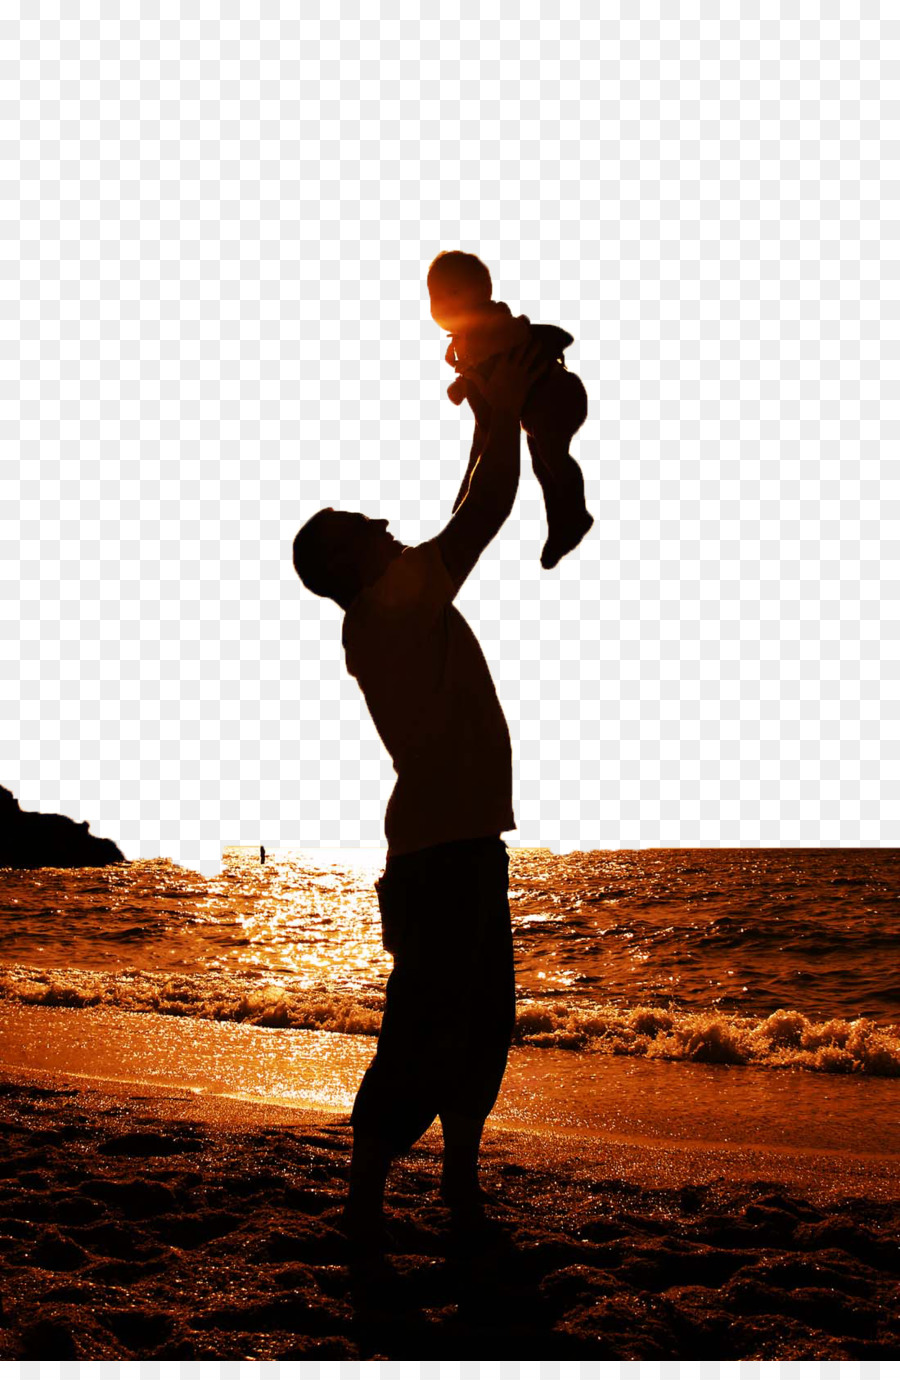 fathers day wallpaper,people in nature,silhouette,standing,human,happy